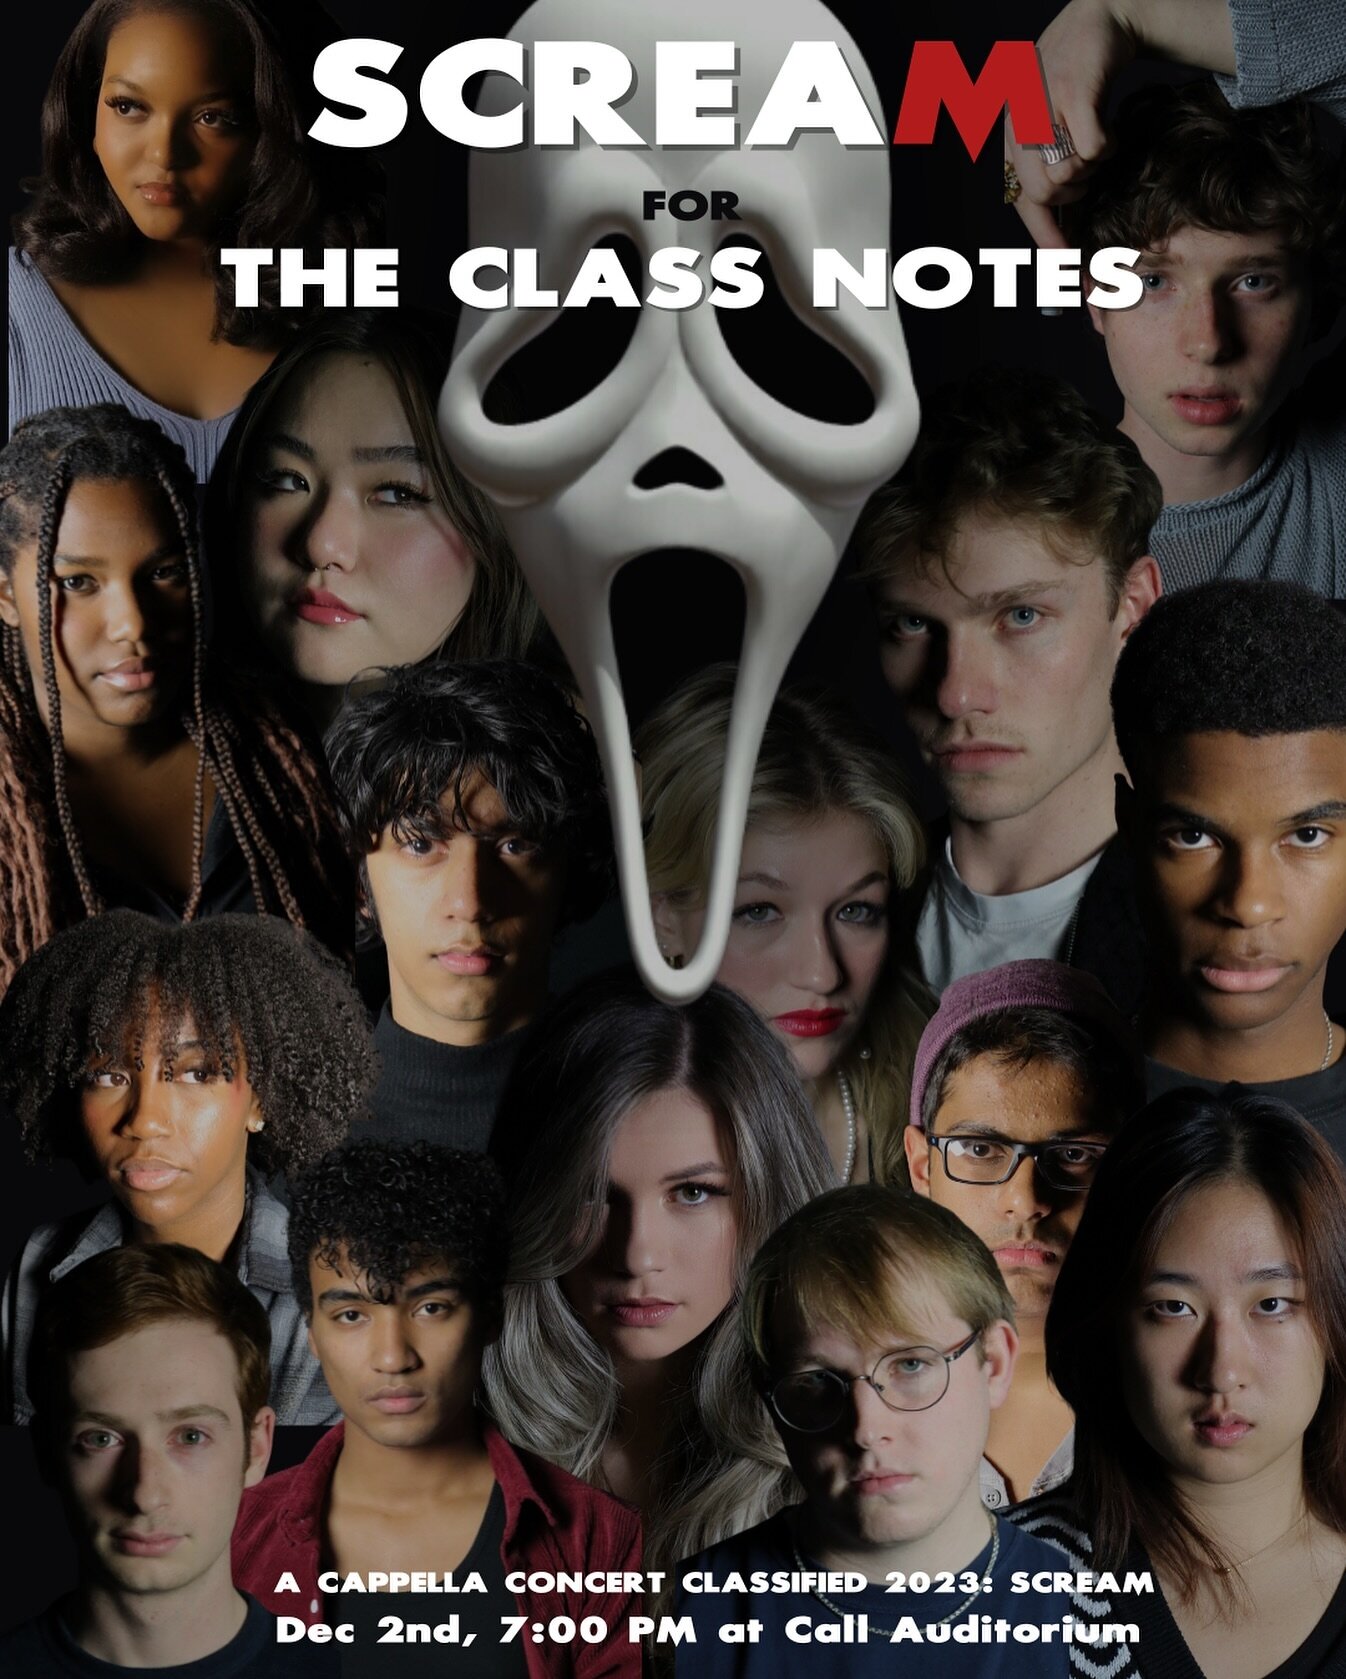 SCREAM for Class Notes A Cappella Concert this Saturday, December 2nd  @7PM at Call Auditorium, Kennedy Hall. Class Notes will perform songs by Frank Ocean, Adele, Ariana Grande, Radiohead and more✨ Get your ticket using the link in our bio 🎫